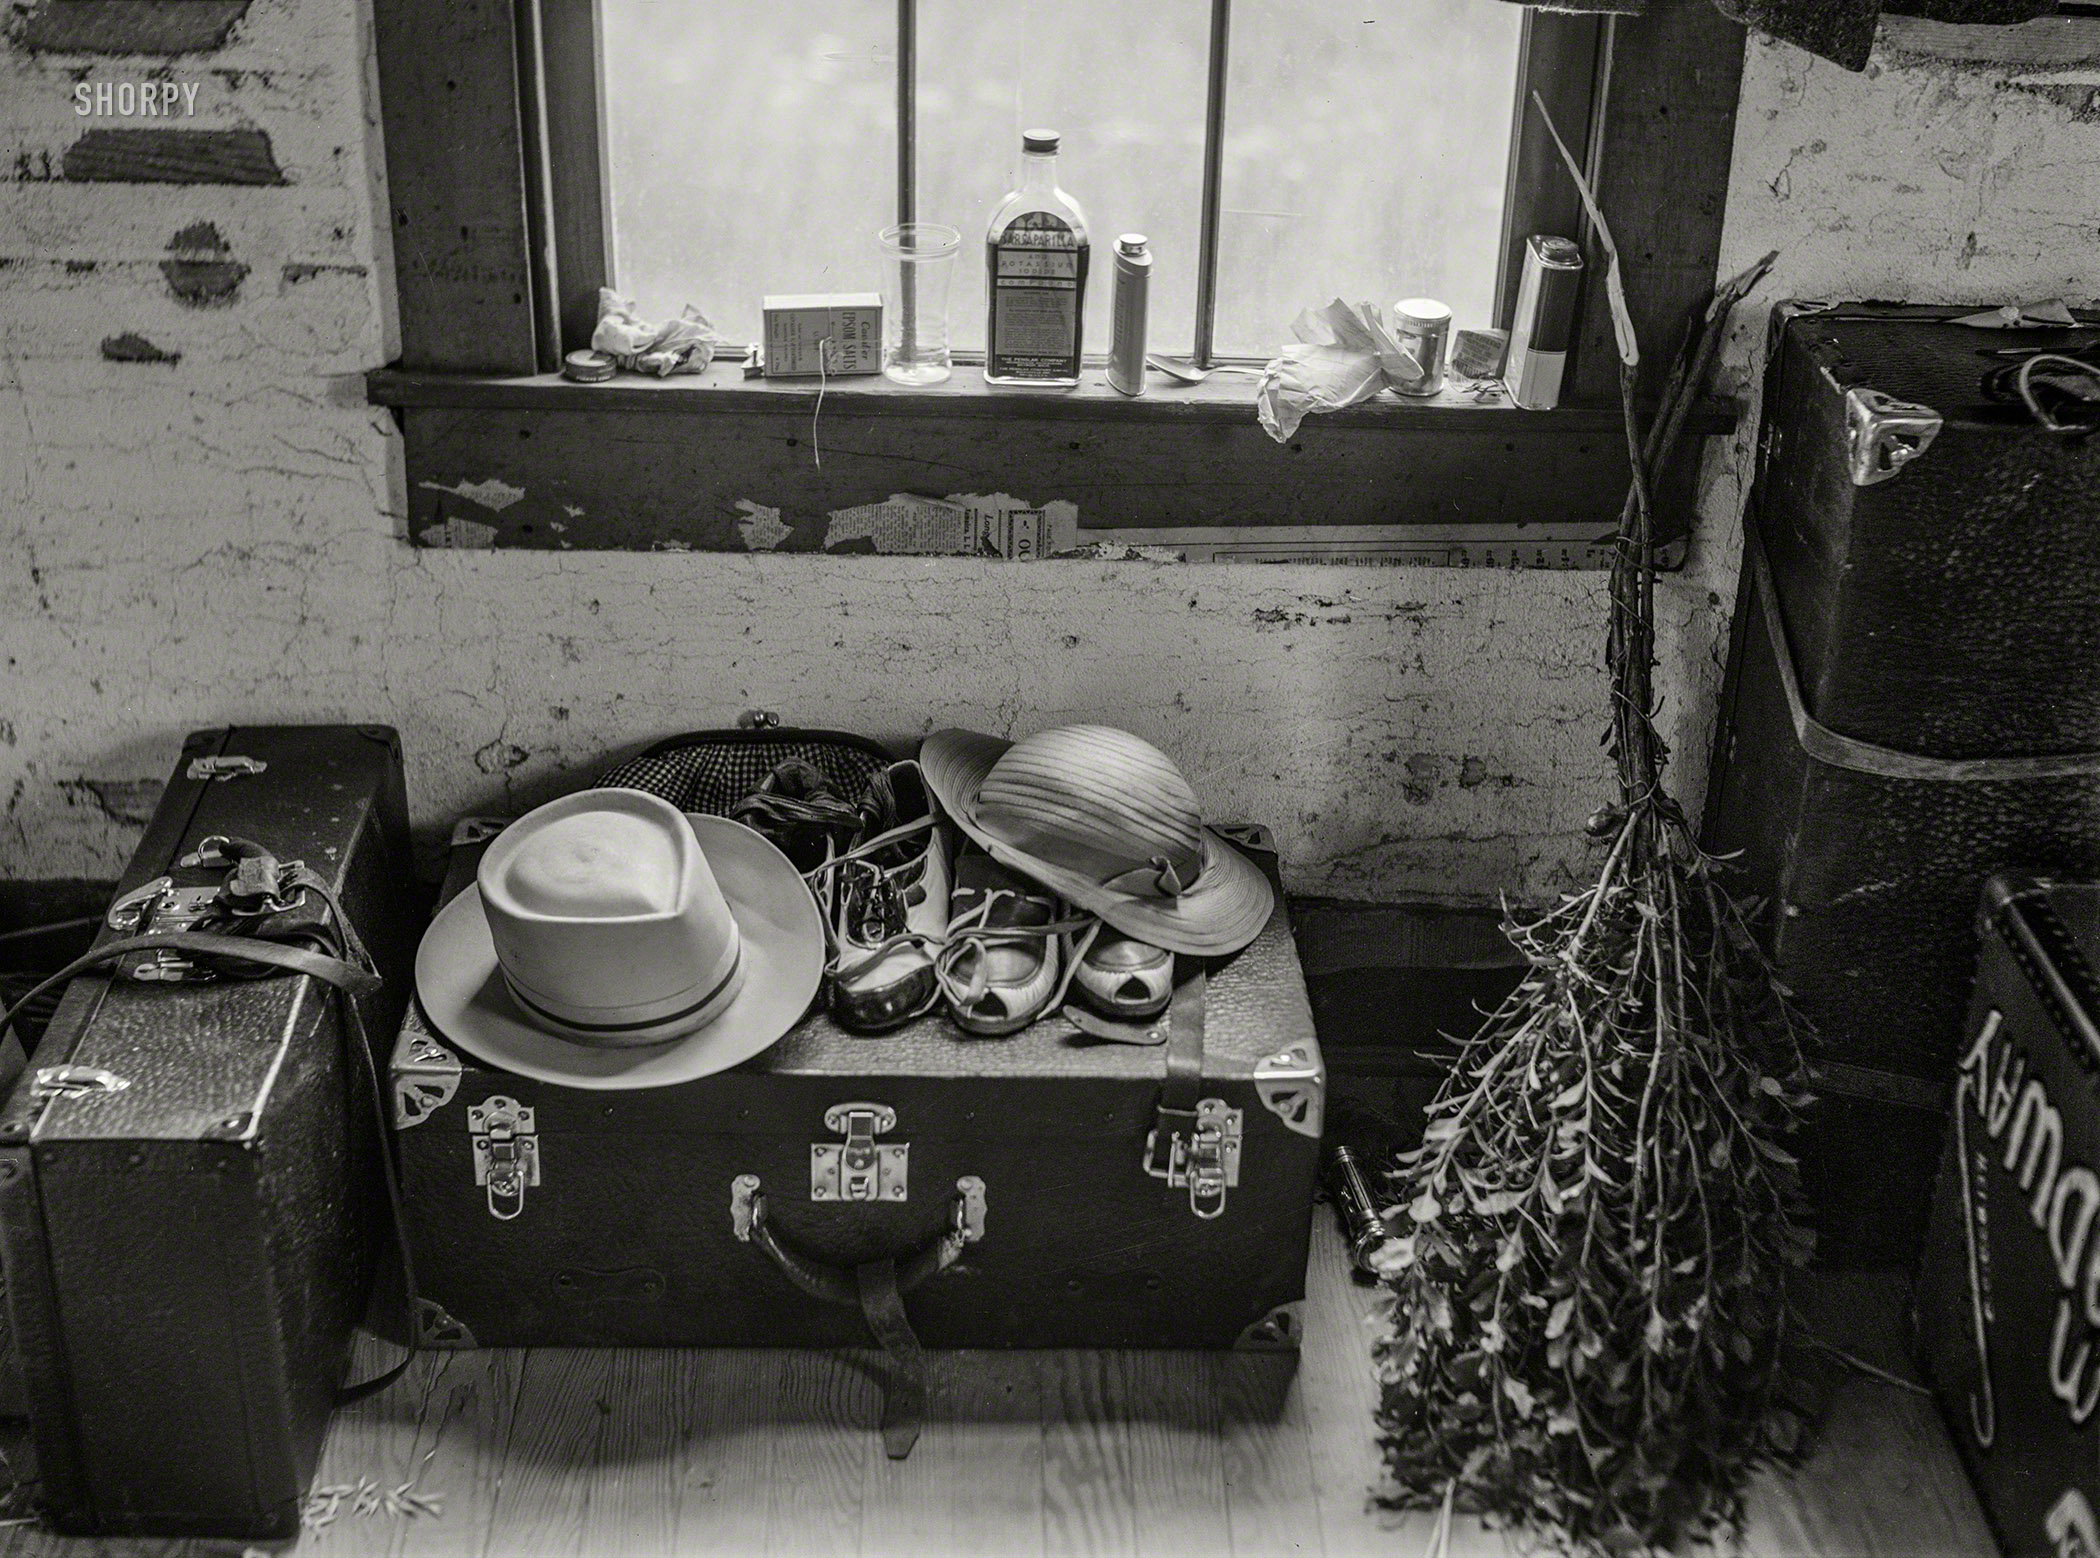 July 1940. "In the new home of a group of migrants just arrived at Onley, Virginia. Barracks, surrounded by barbed wire fence, house Negro agricultural workers from Florida who have come to work the Eastern Shore strawberry, onion and cabbage fields in picking, grading and canning." Medium format acetate negative by Jack Delano for the Farm Security Administration. View full size.